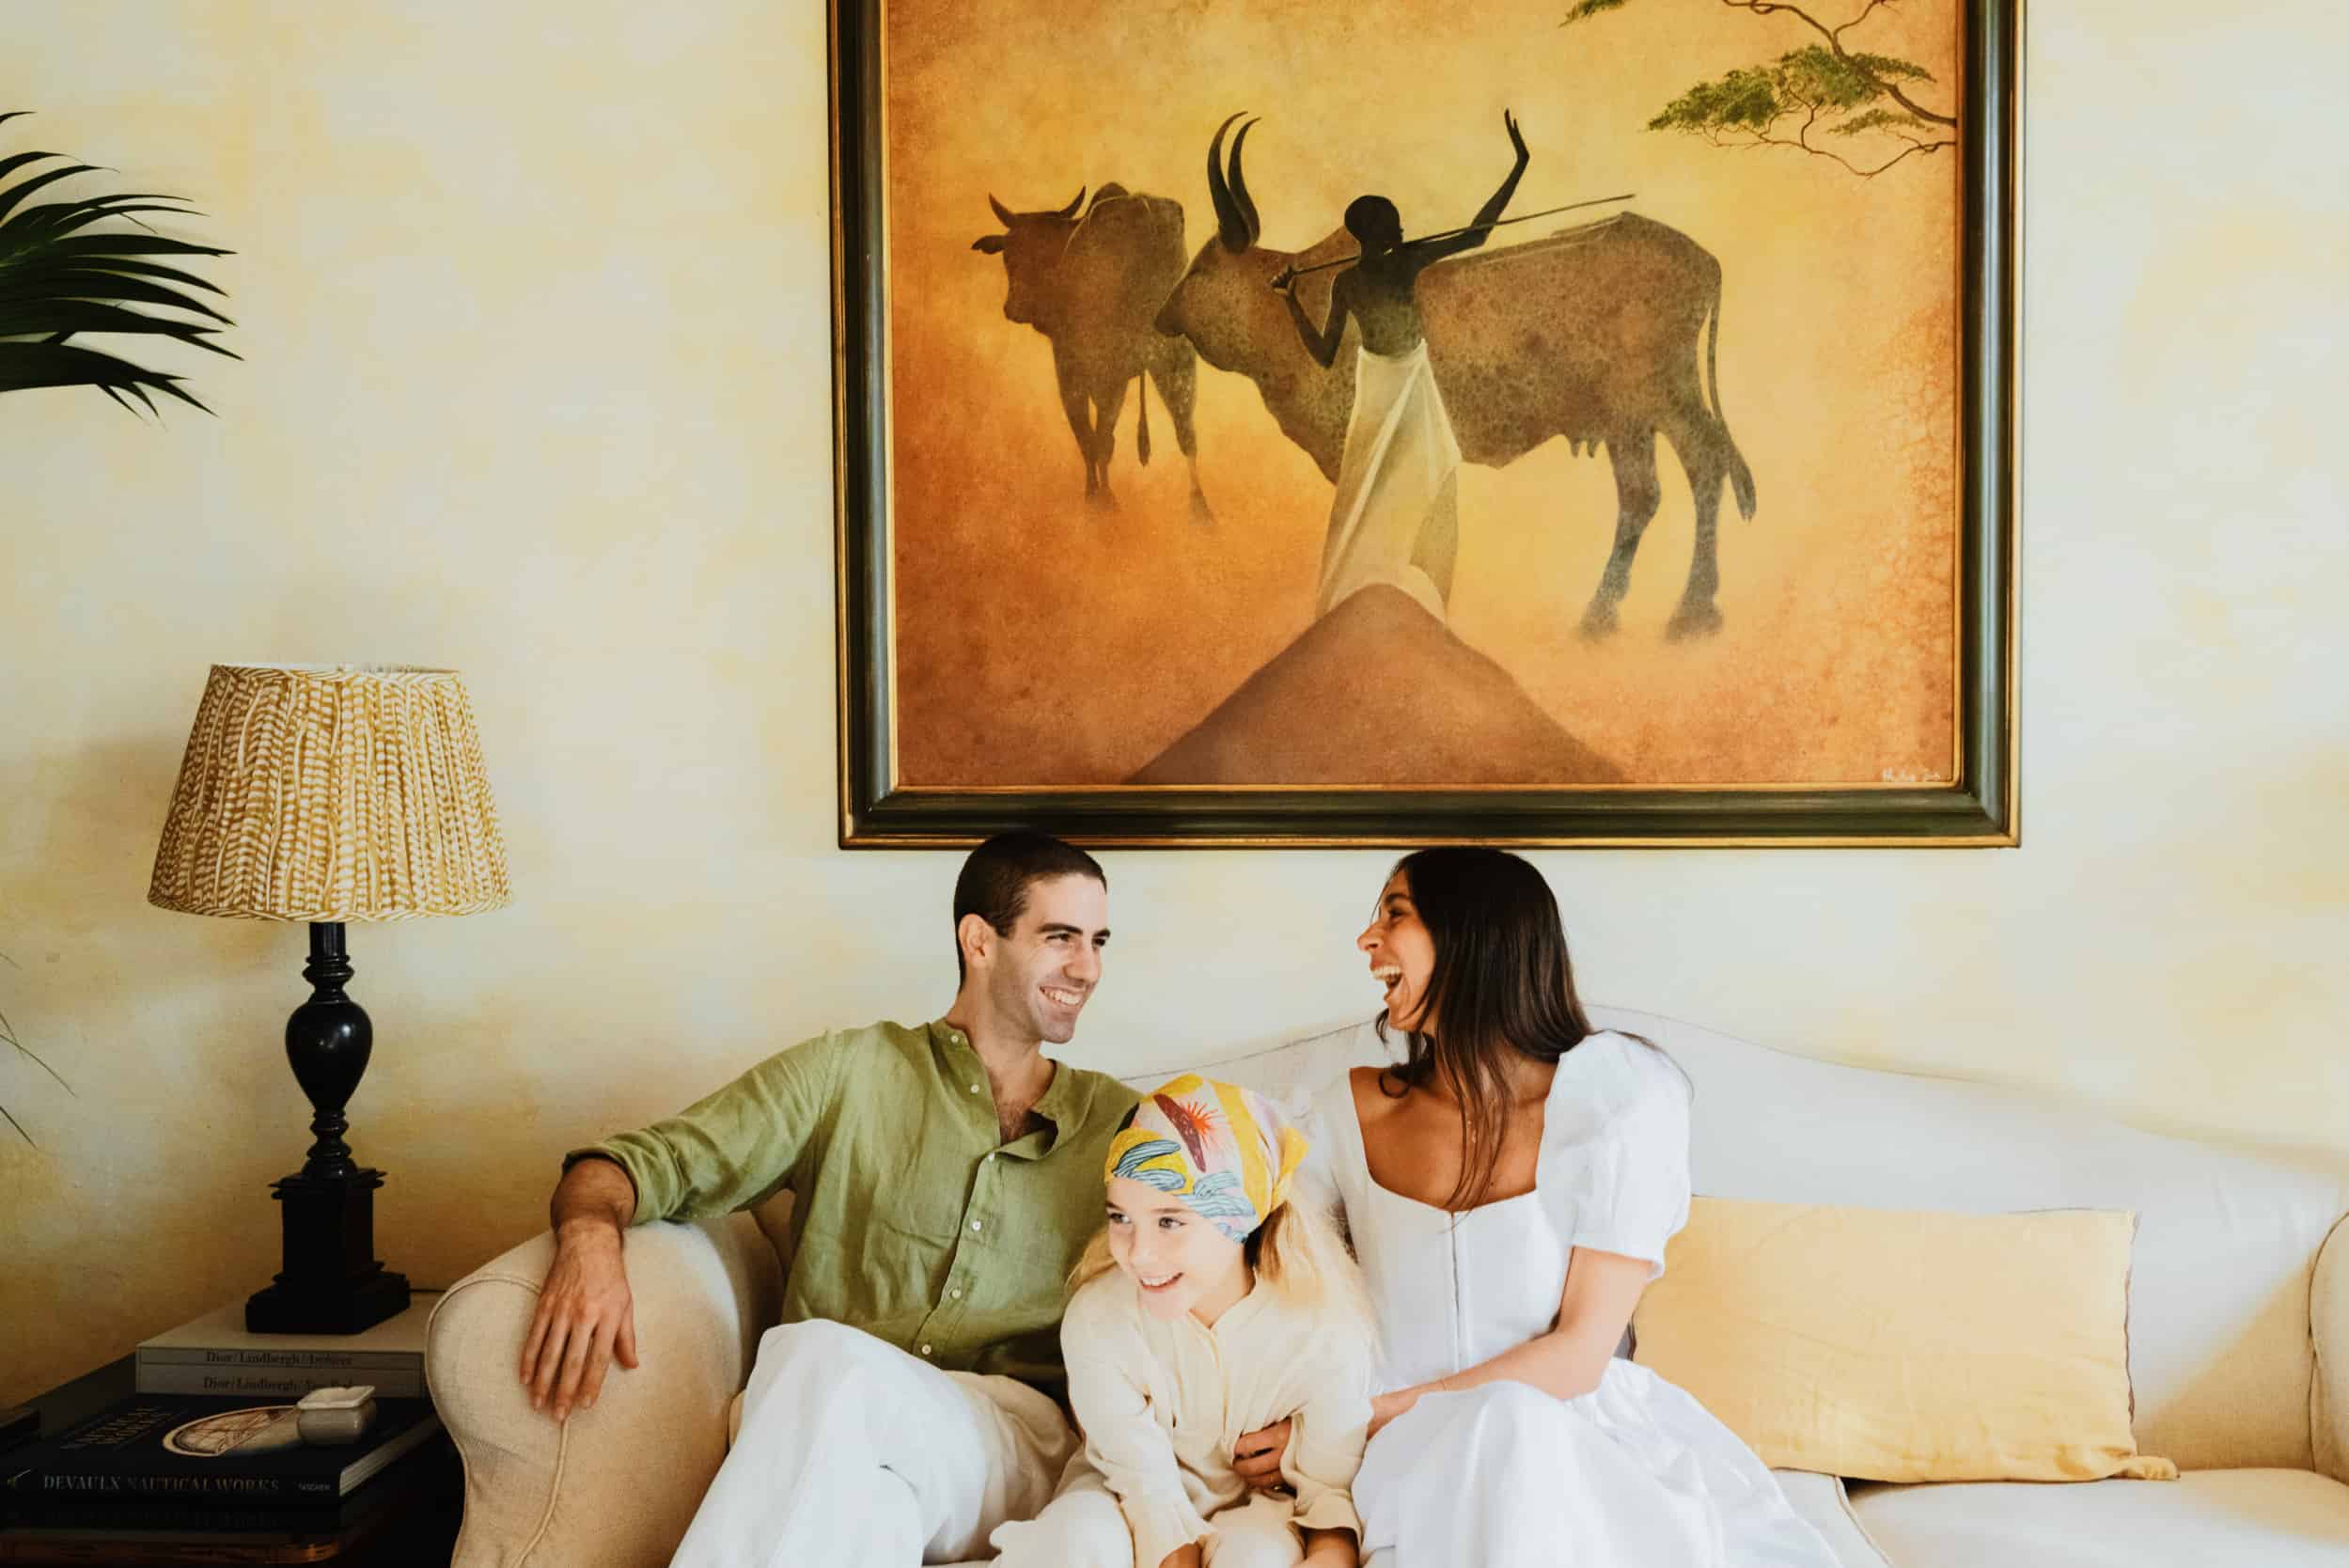 Woman-in-white-dress-and-man-in-green-shirt-sat-on-a-couch-with-a-little-girl-all laughing